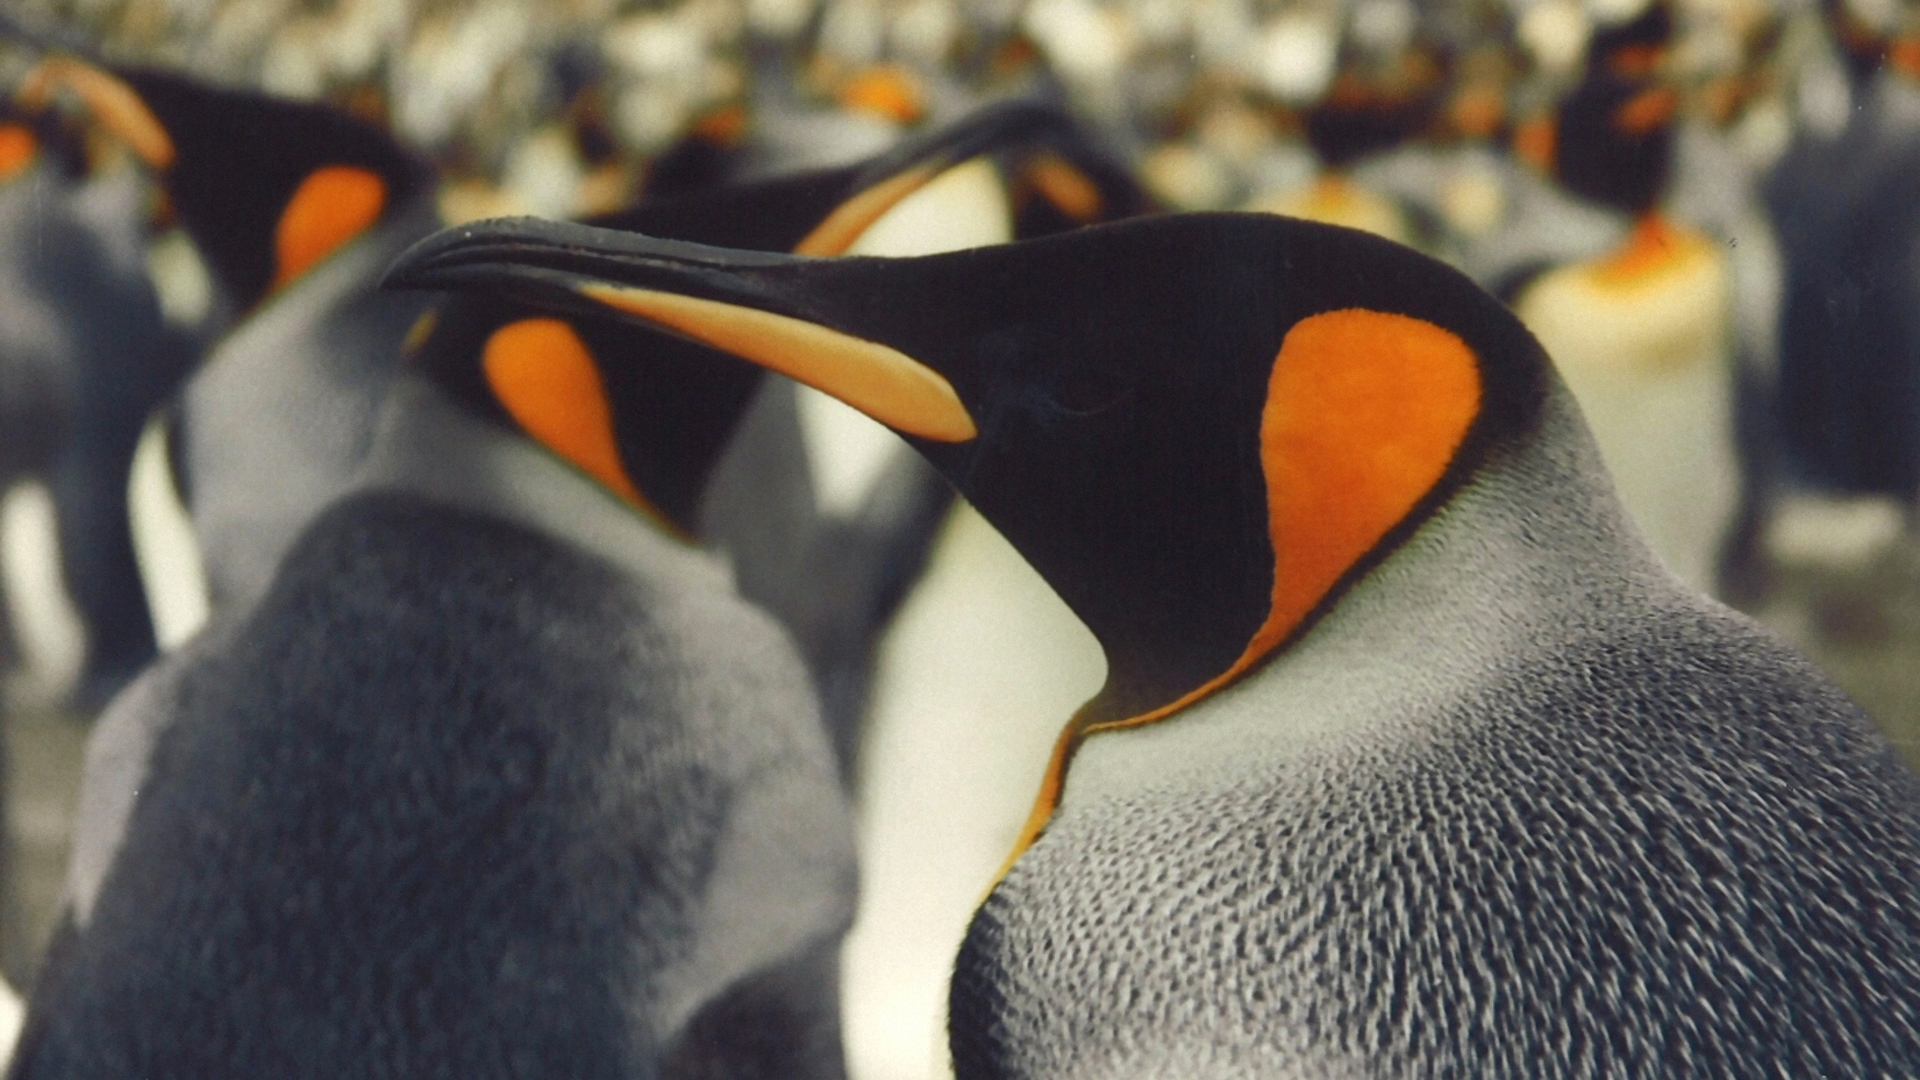 Evaluation of the impact of climate change on king penguins by a biologging system